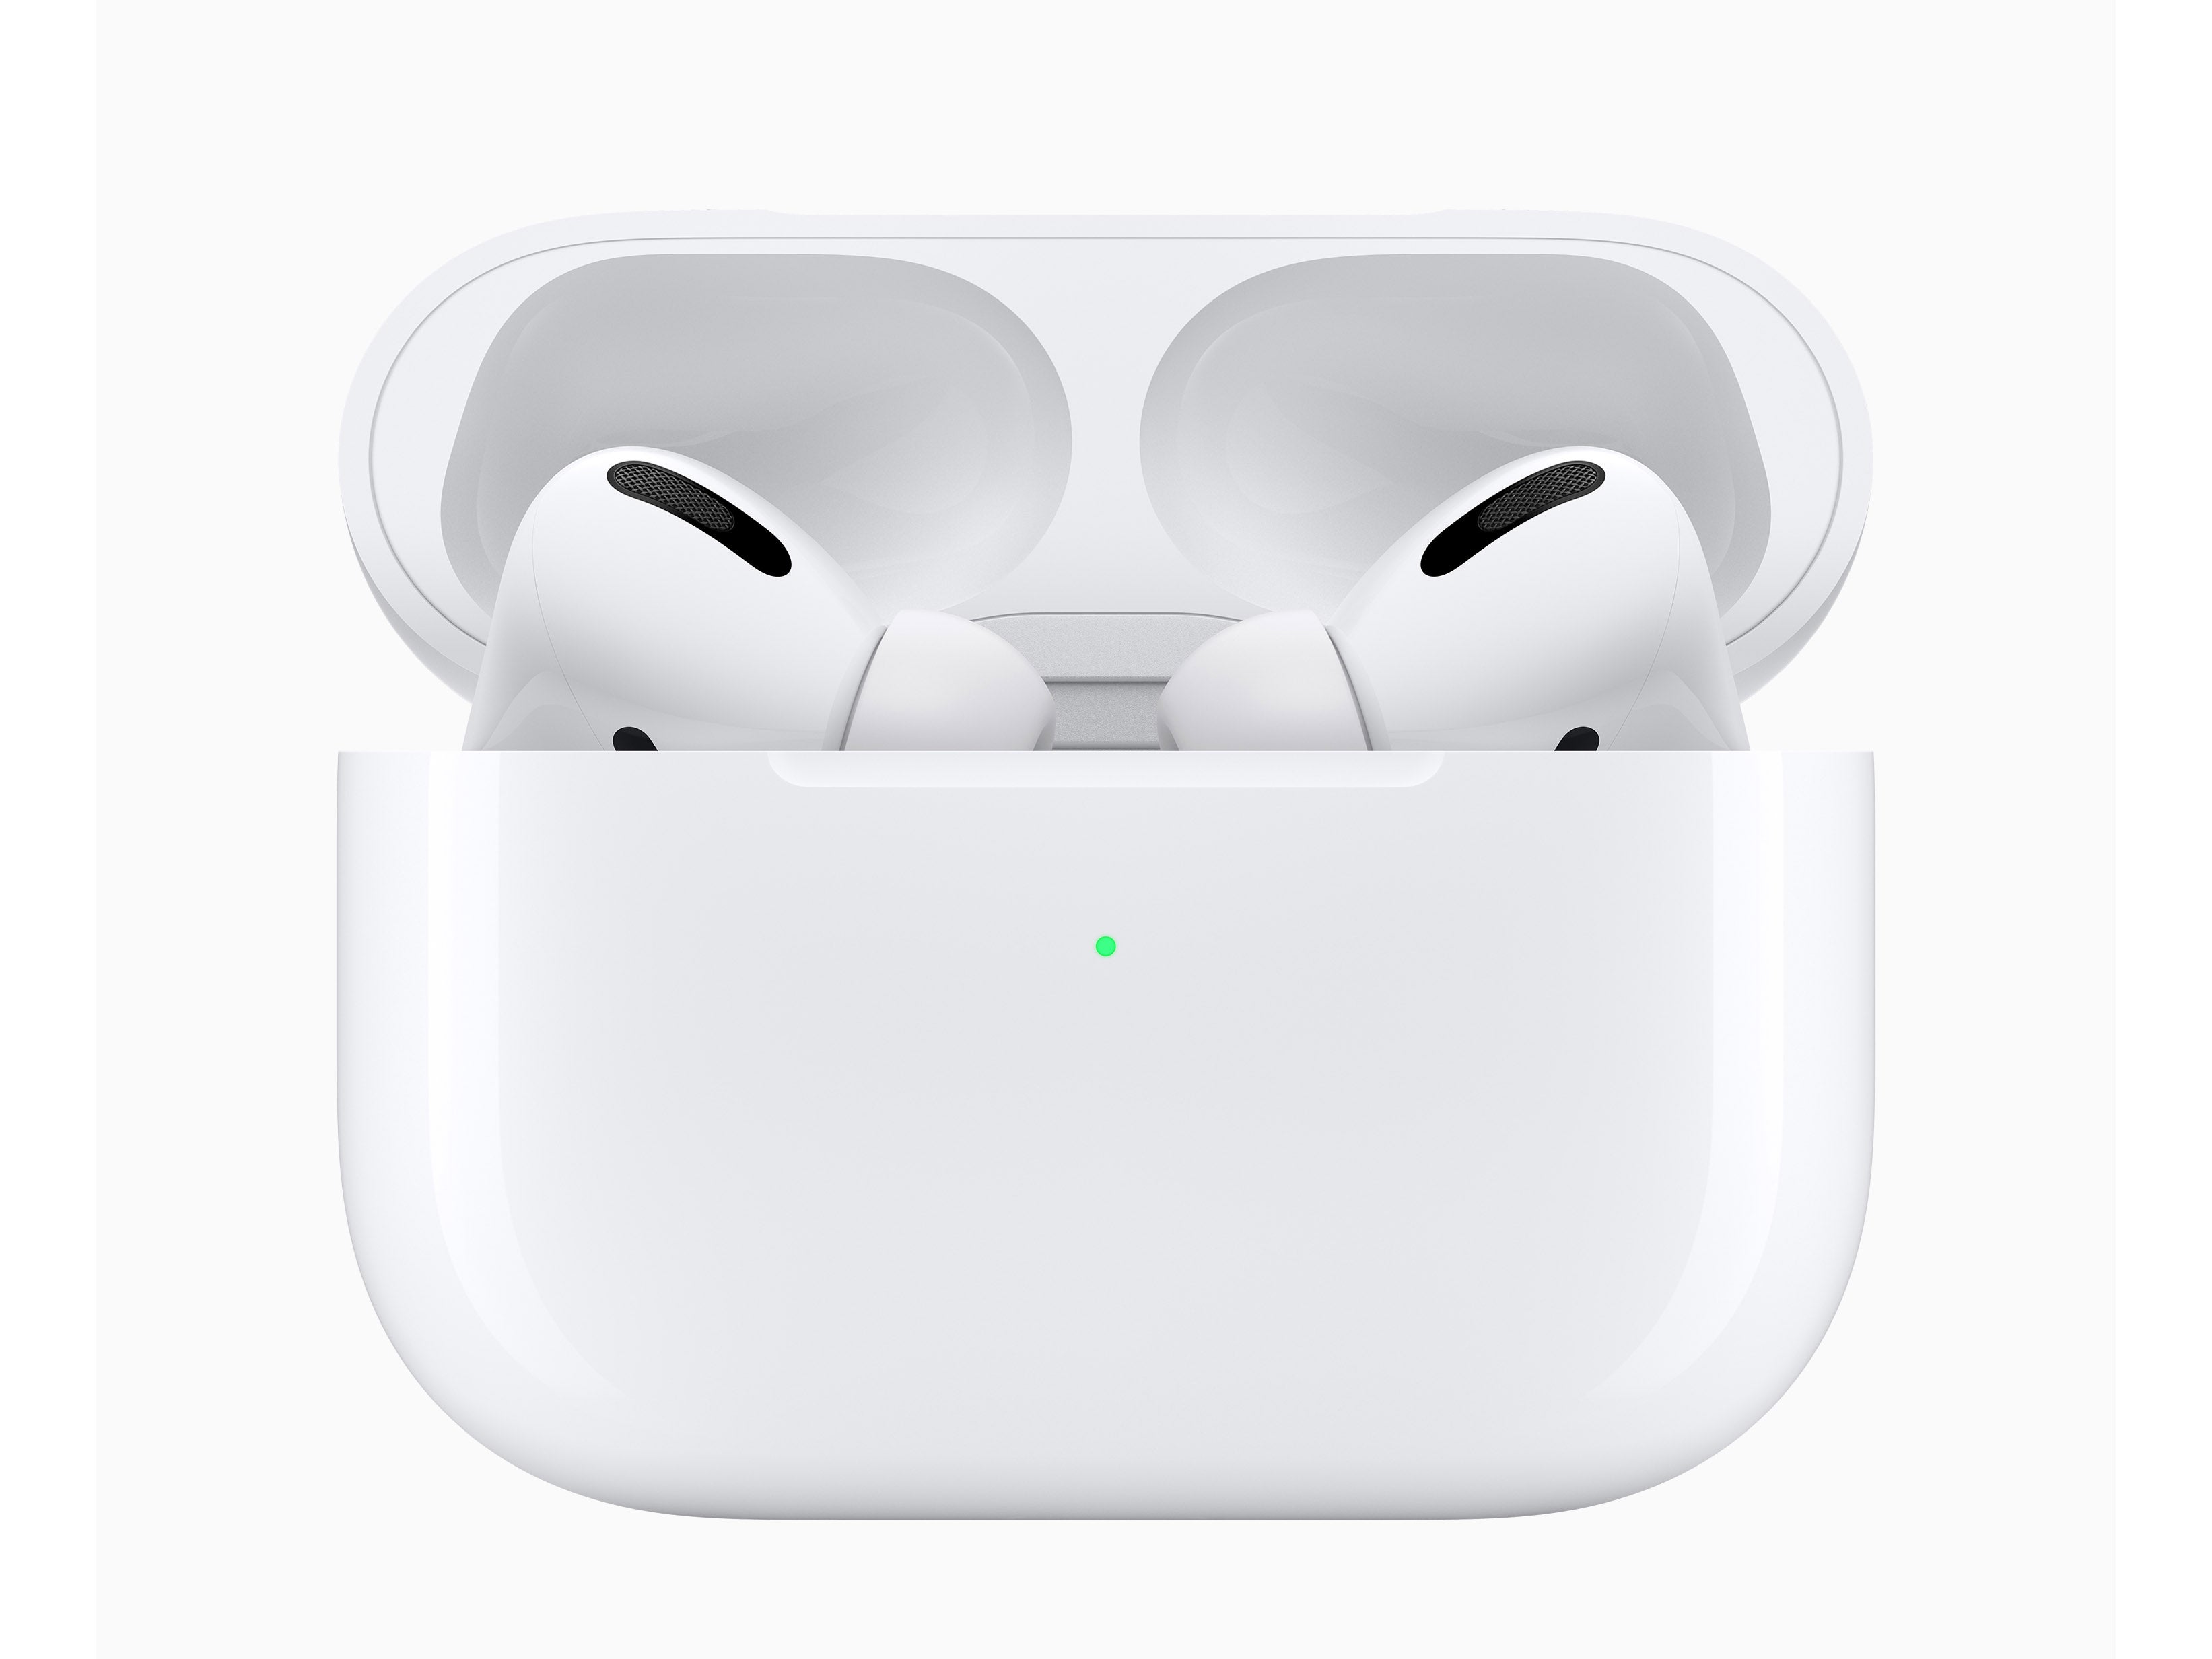 Apple AirPods Pro New Design Case And AirPods Pro.jpg